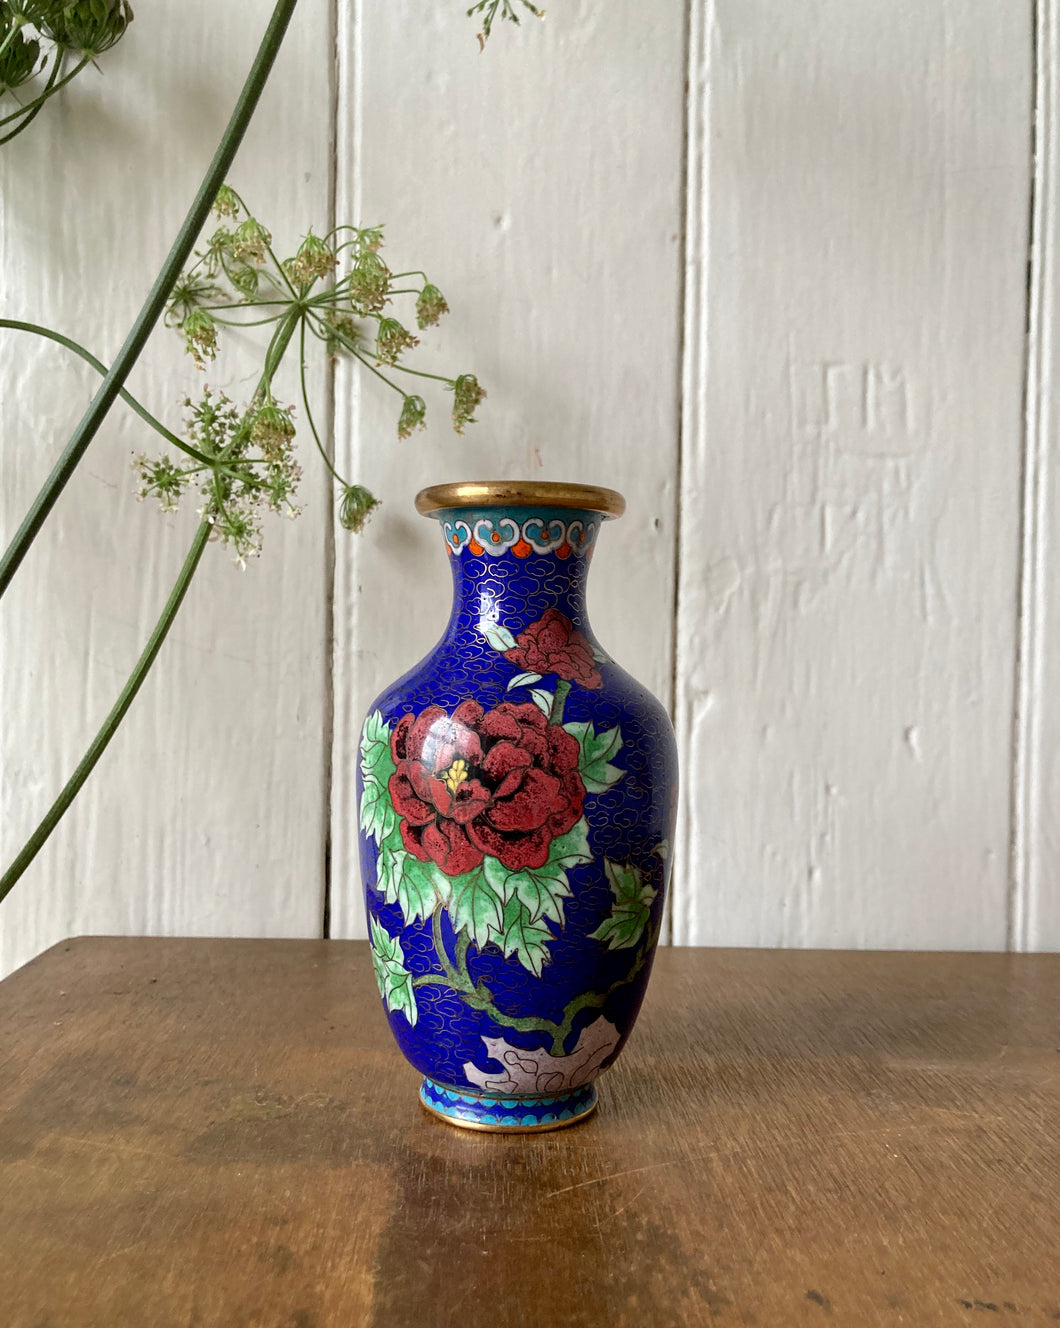 Decorative cloisonné vase in blue with peonies and butterfly